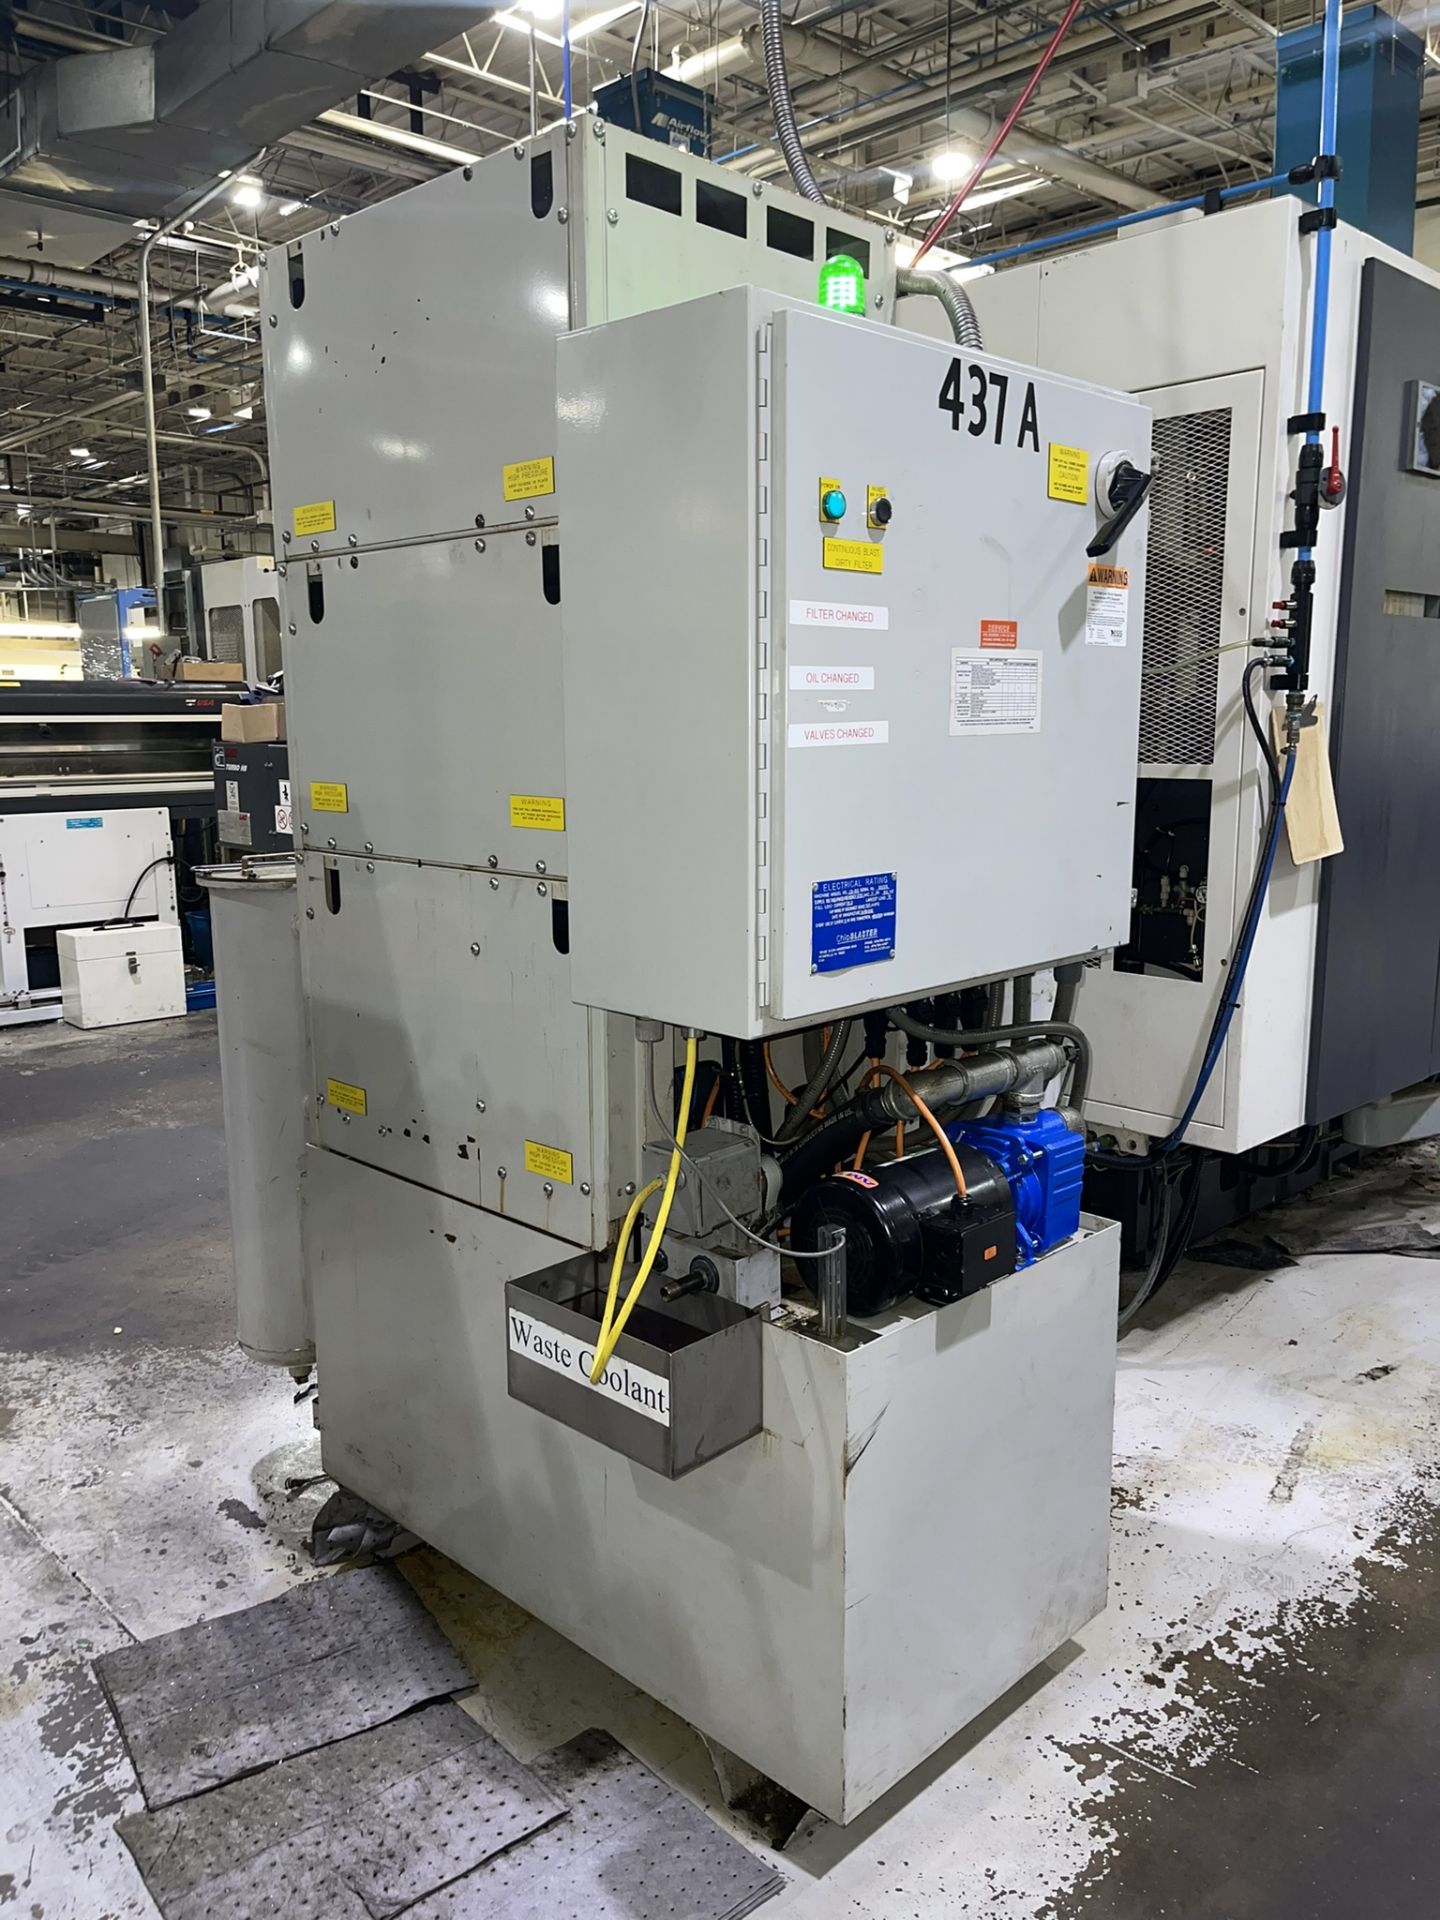 2012 Nakamura Super-Mill WY-250L 10-Axis CNC Turning/Milling Center, S/N N280204 - Image 18 of 22